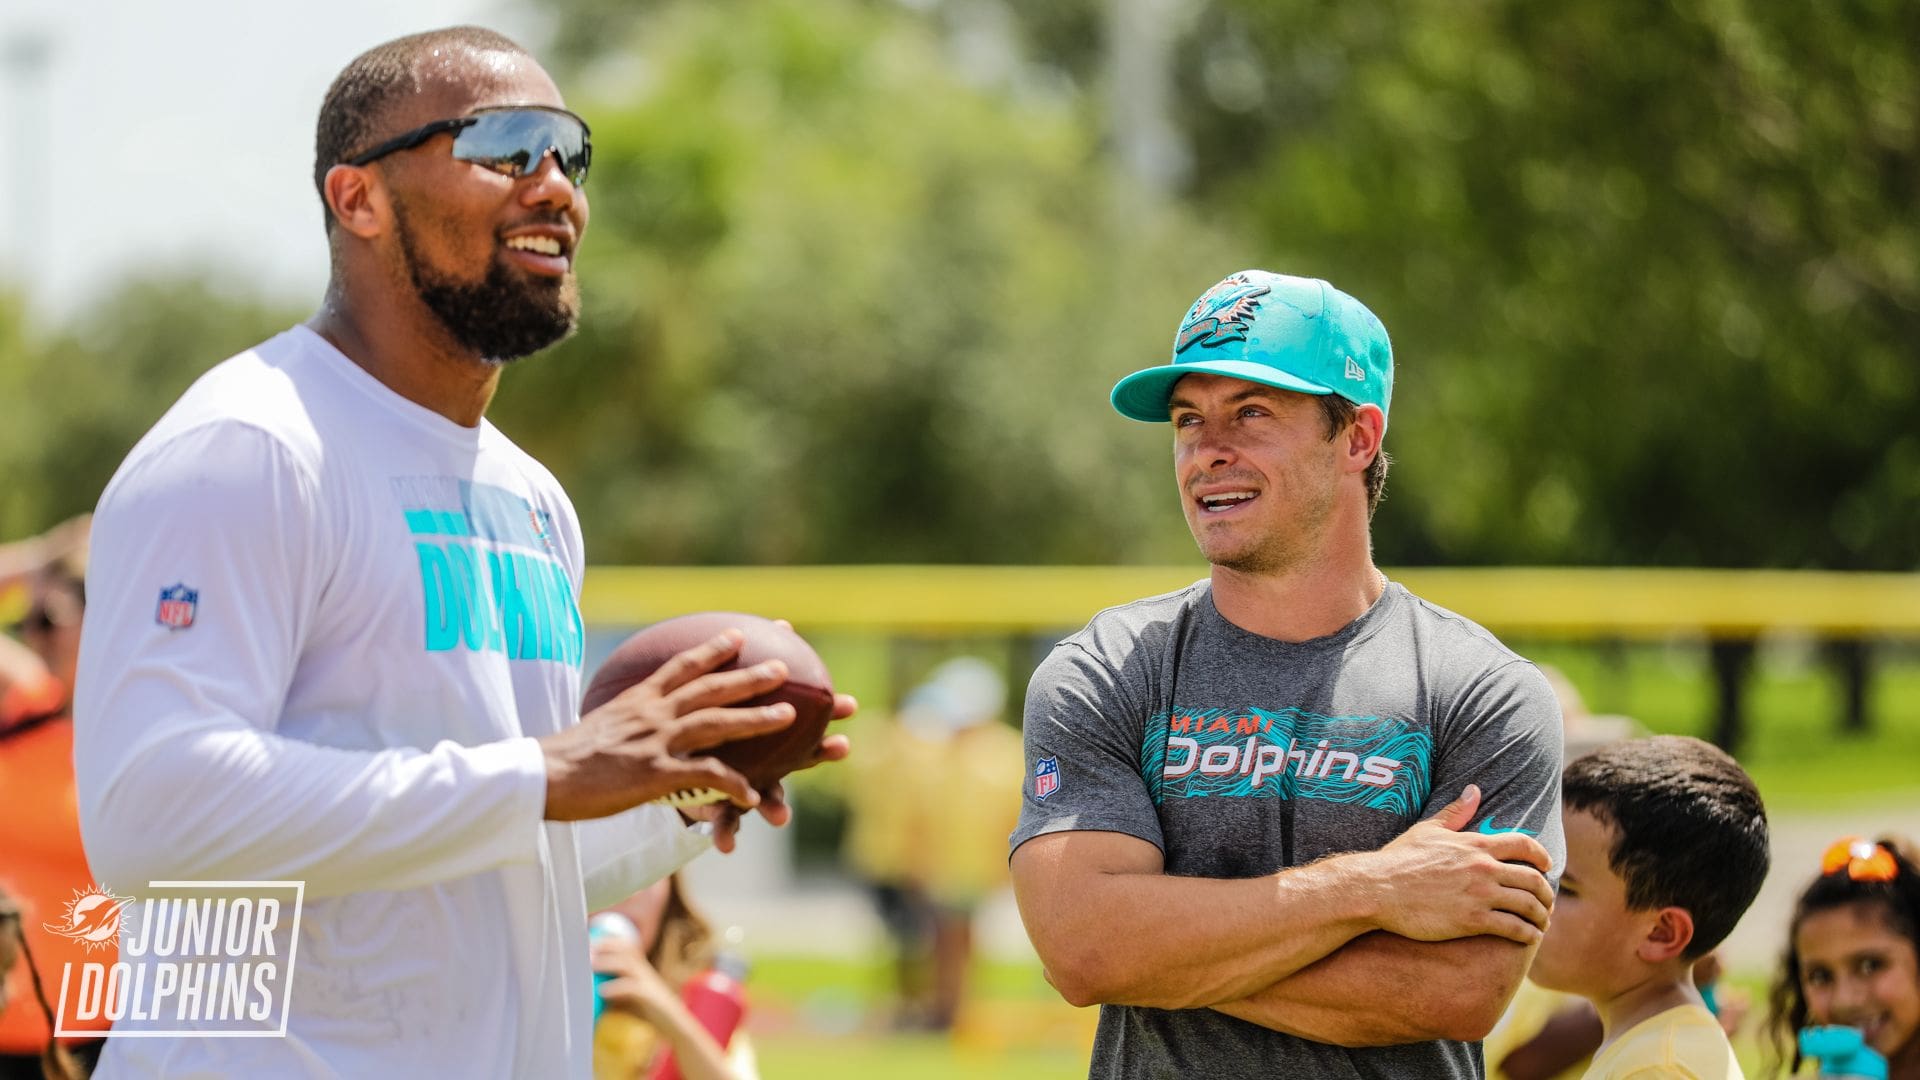 Miami Dolphins Players and YMCA Host Hundreds of Kids for Junior Dolphins  Summer Camp Tours in Weston